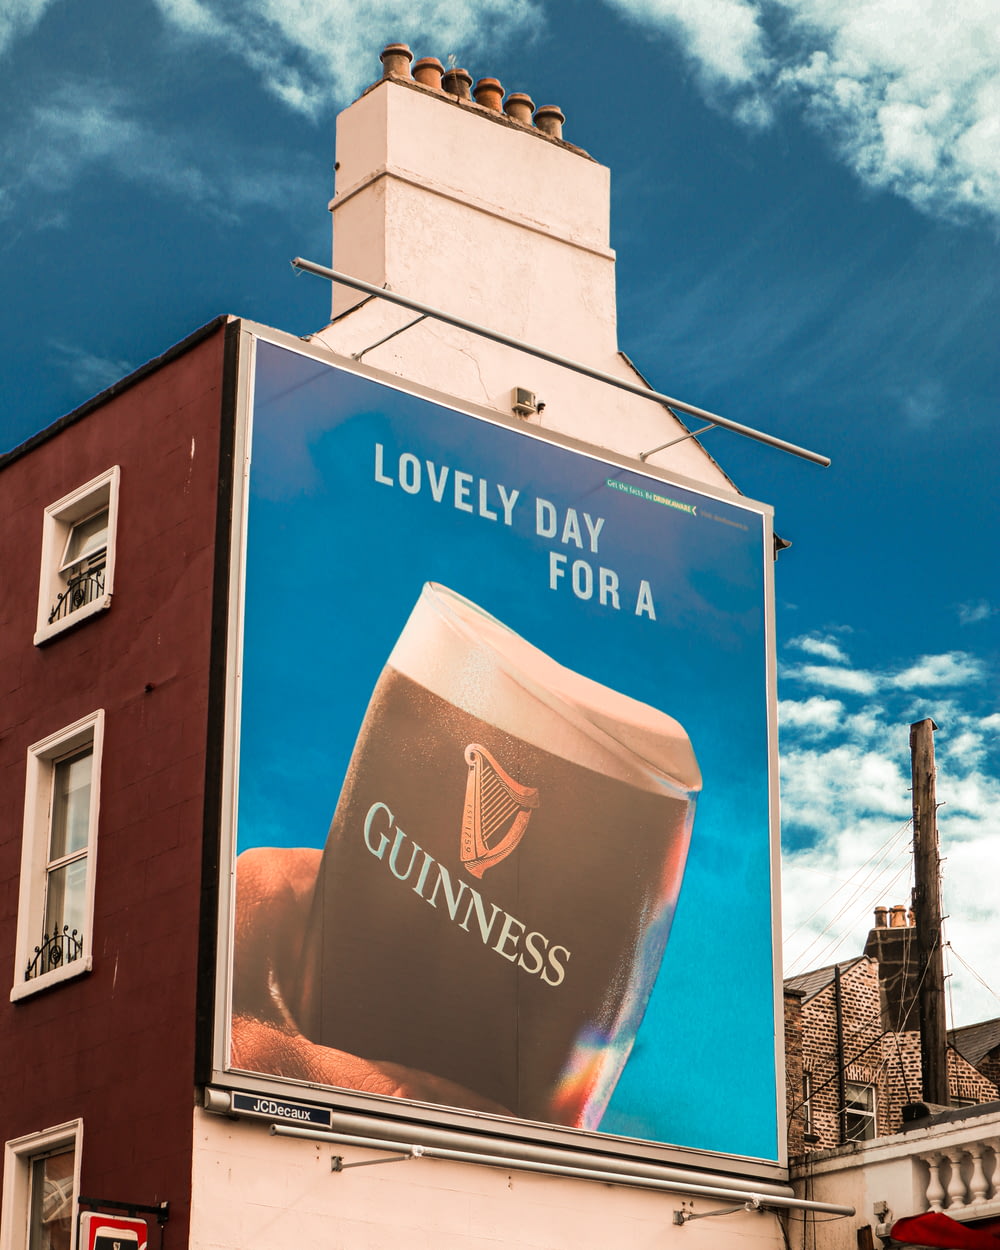 a large guinness advertisement on a building